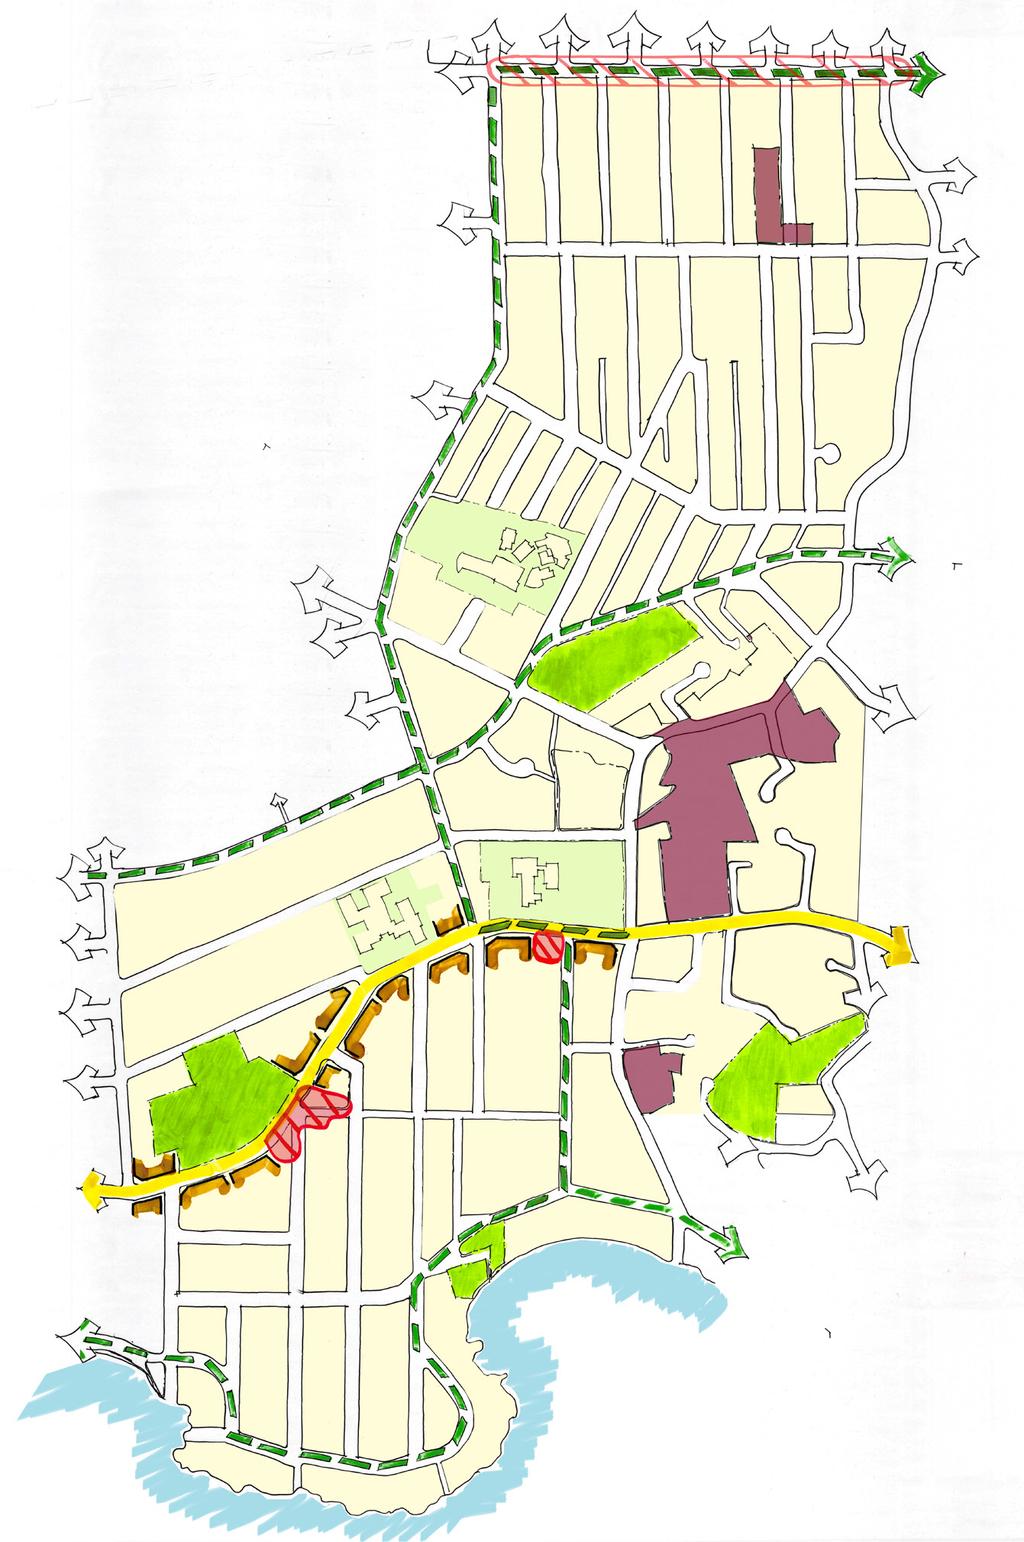 Key Moves in the Plan 2 Add housing that fits the neighbourhood s character Make it easier to leave the car behind Oak Bay Avenue Village plan to be completed in future planning process Future active